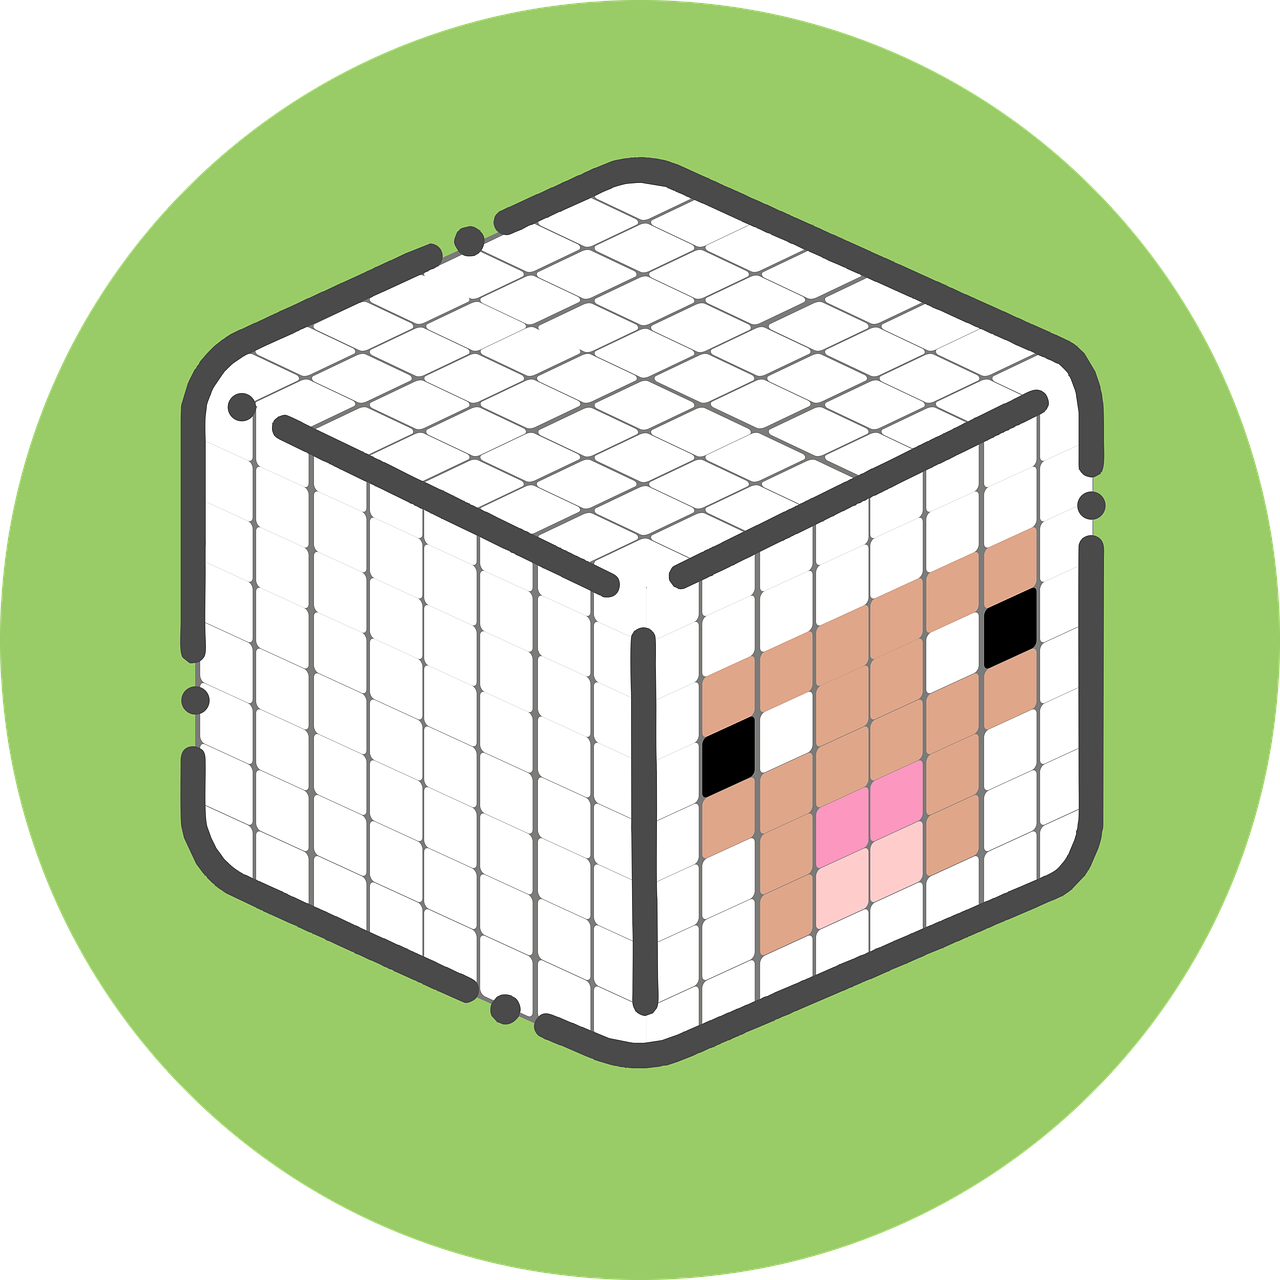 a picture of a cube with a face on it, pixel art, grid and web, all enclosed in a circle, style of minecraft, cage